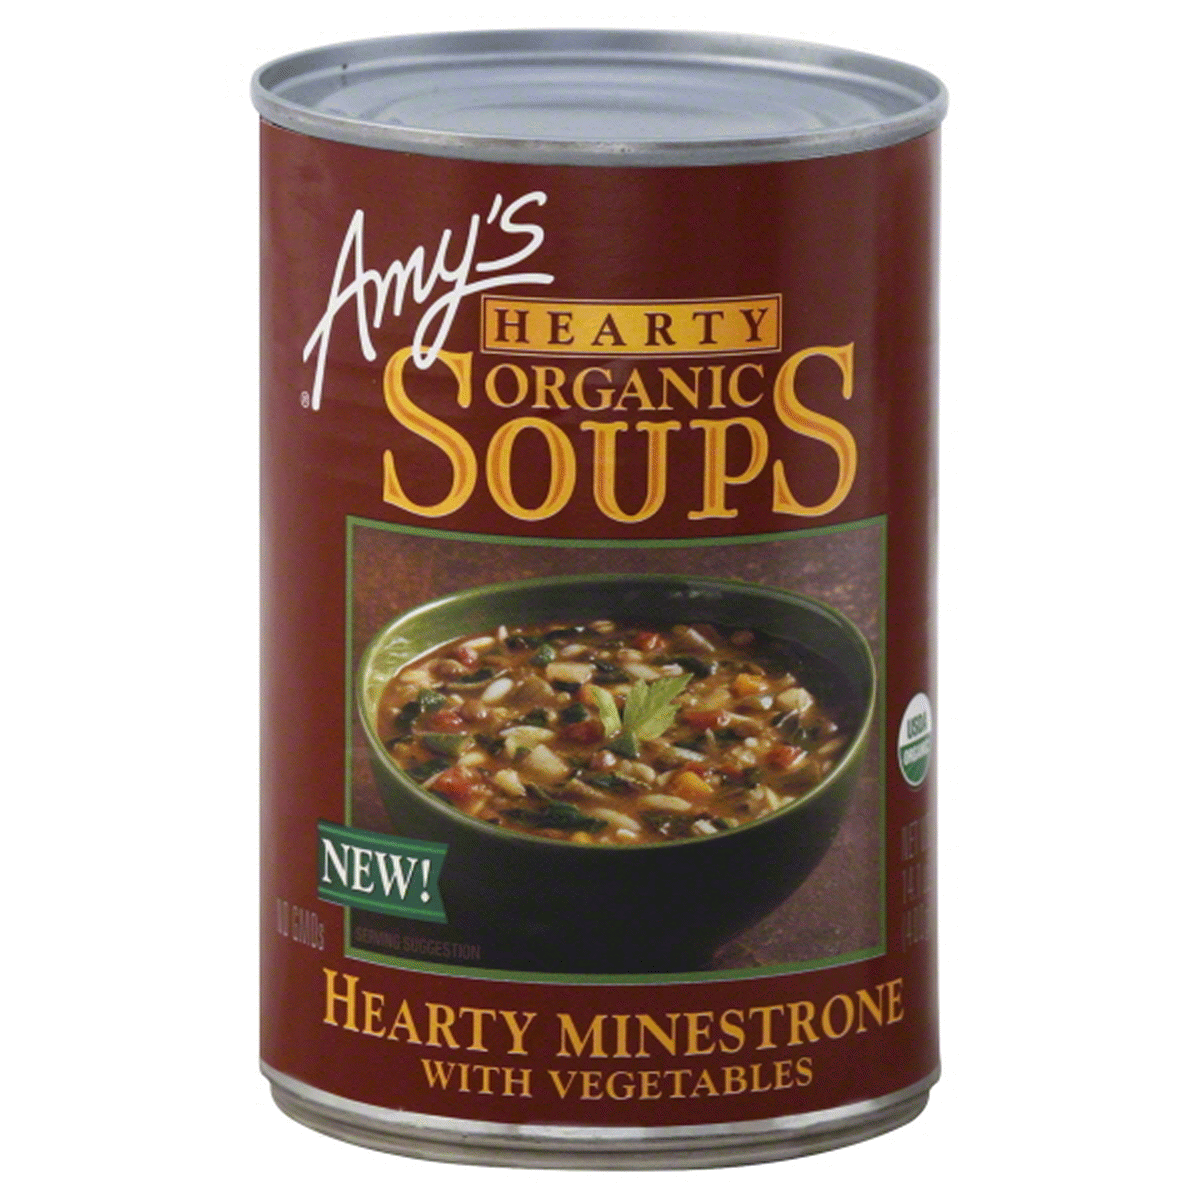 slide 1 of 1, Hearty Minestrone with Vegetables Soup, 14.1 oz